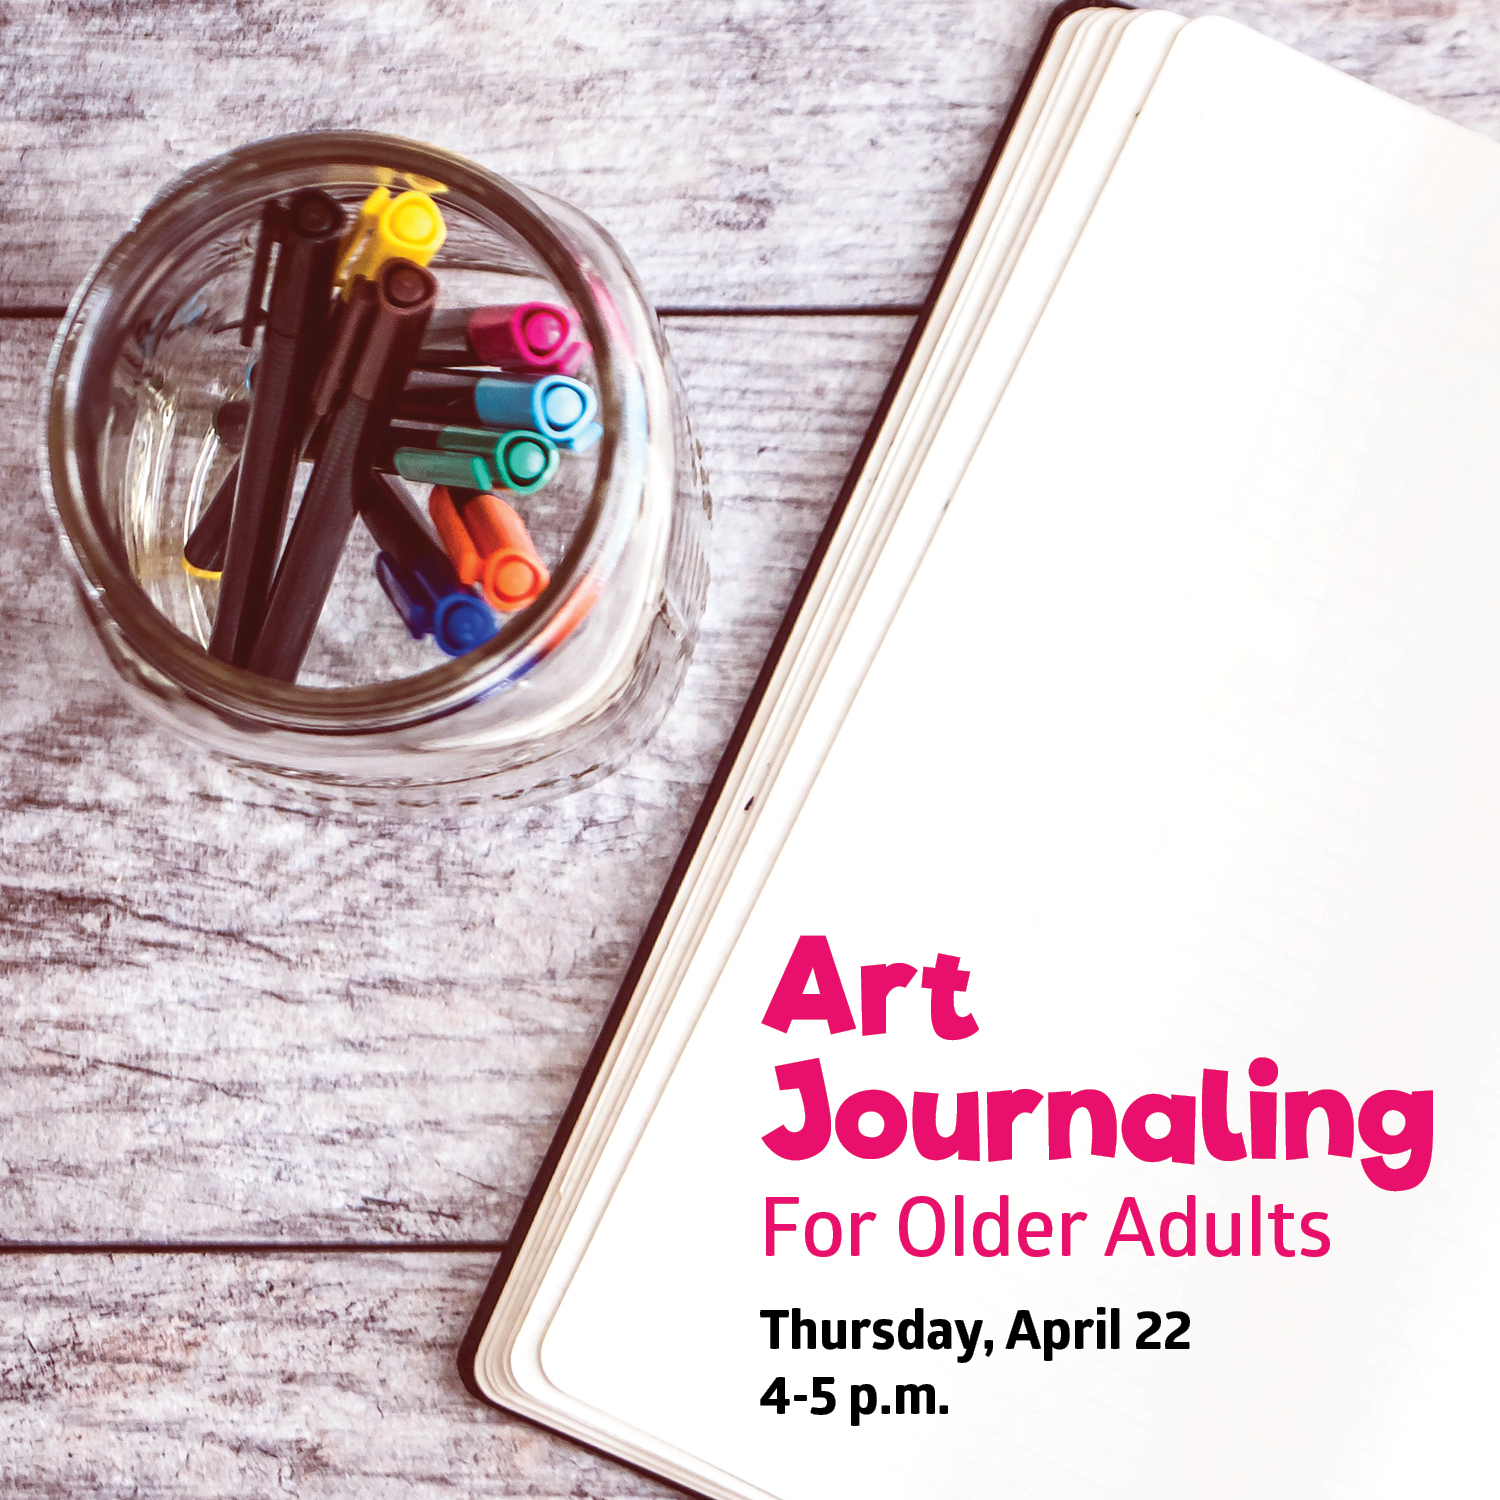 Glass jar of micron pens in various colors along with a journal open to a blank page with the text "Art Journaling for Older Adults, Thursday, April 22, 4-5pm" at the bottom